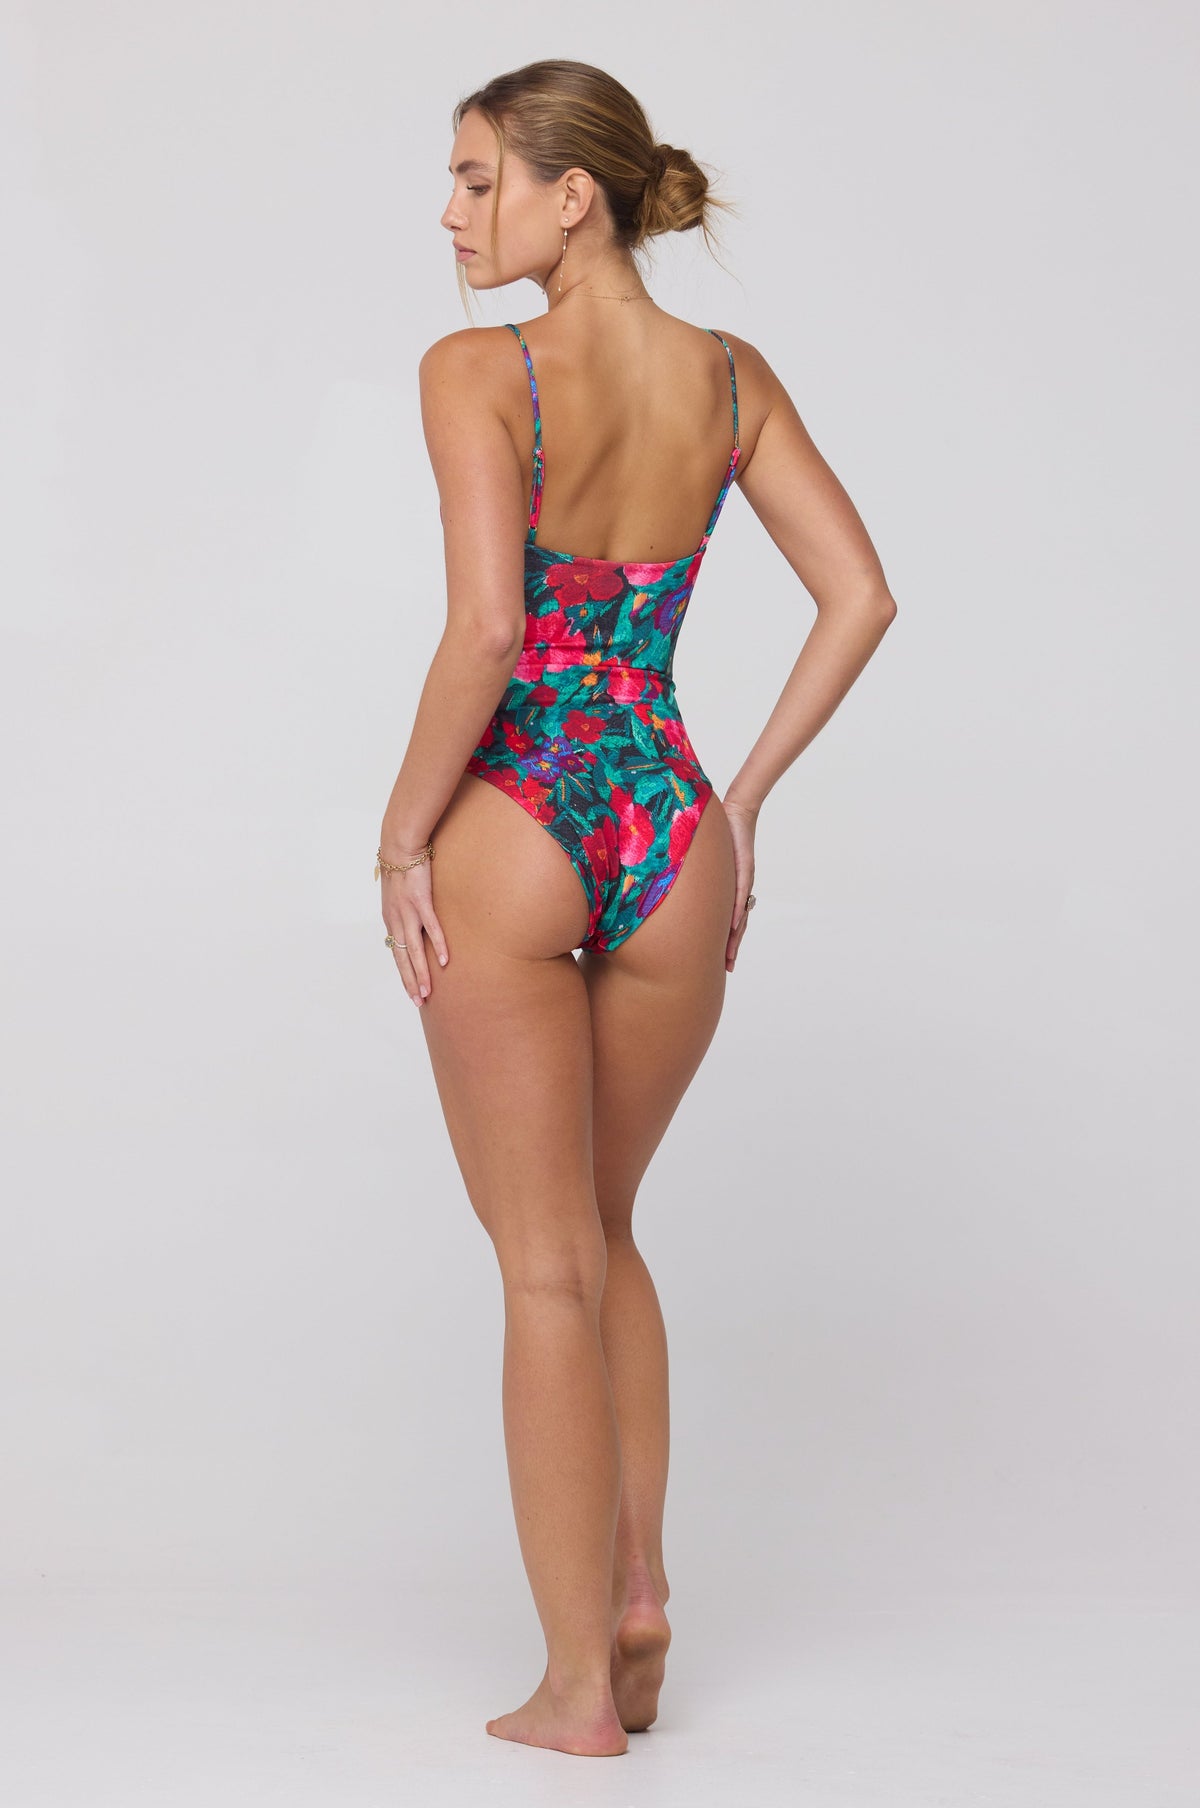 This is an image of Dominick One Piece Swimsuit in Resort - RESA featuring a model wearing the dress